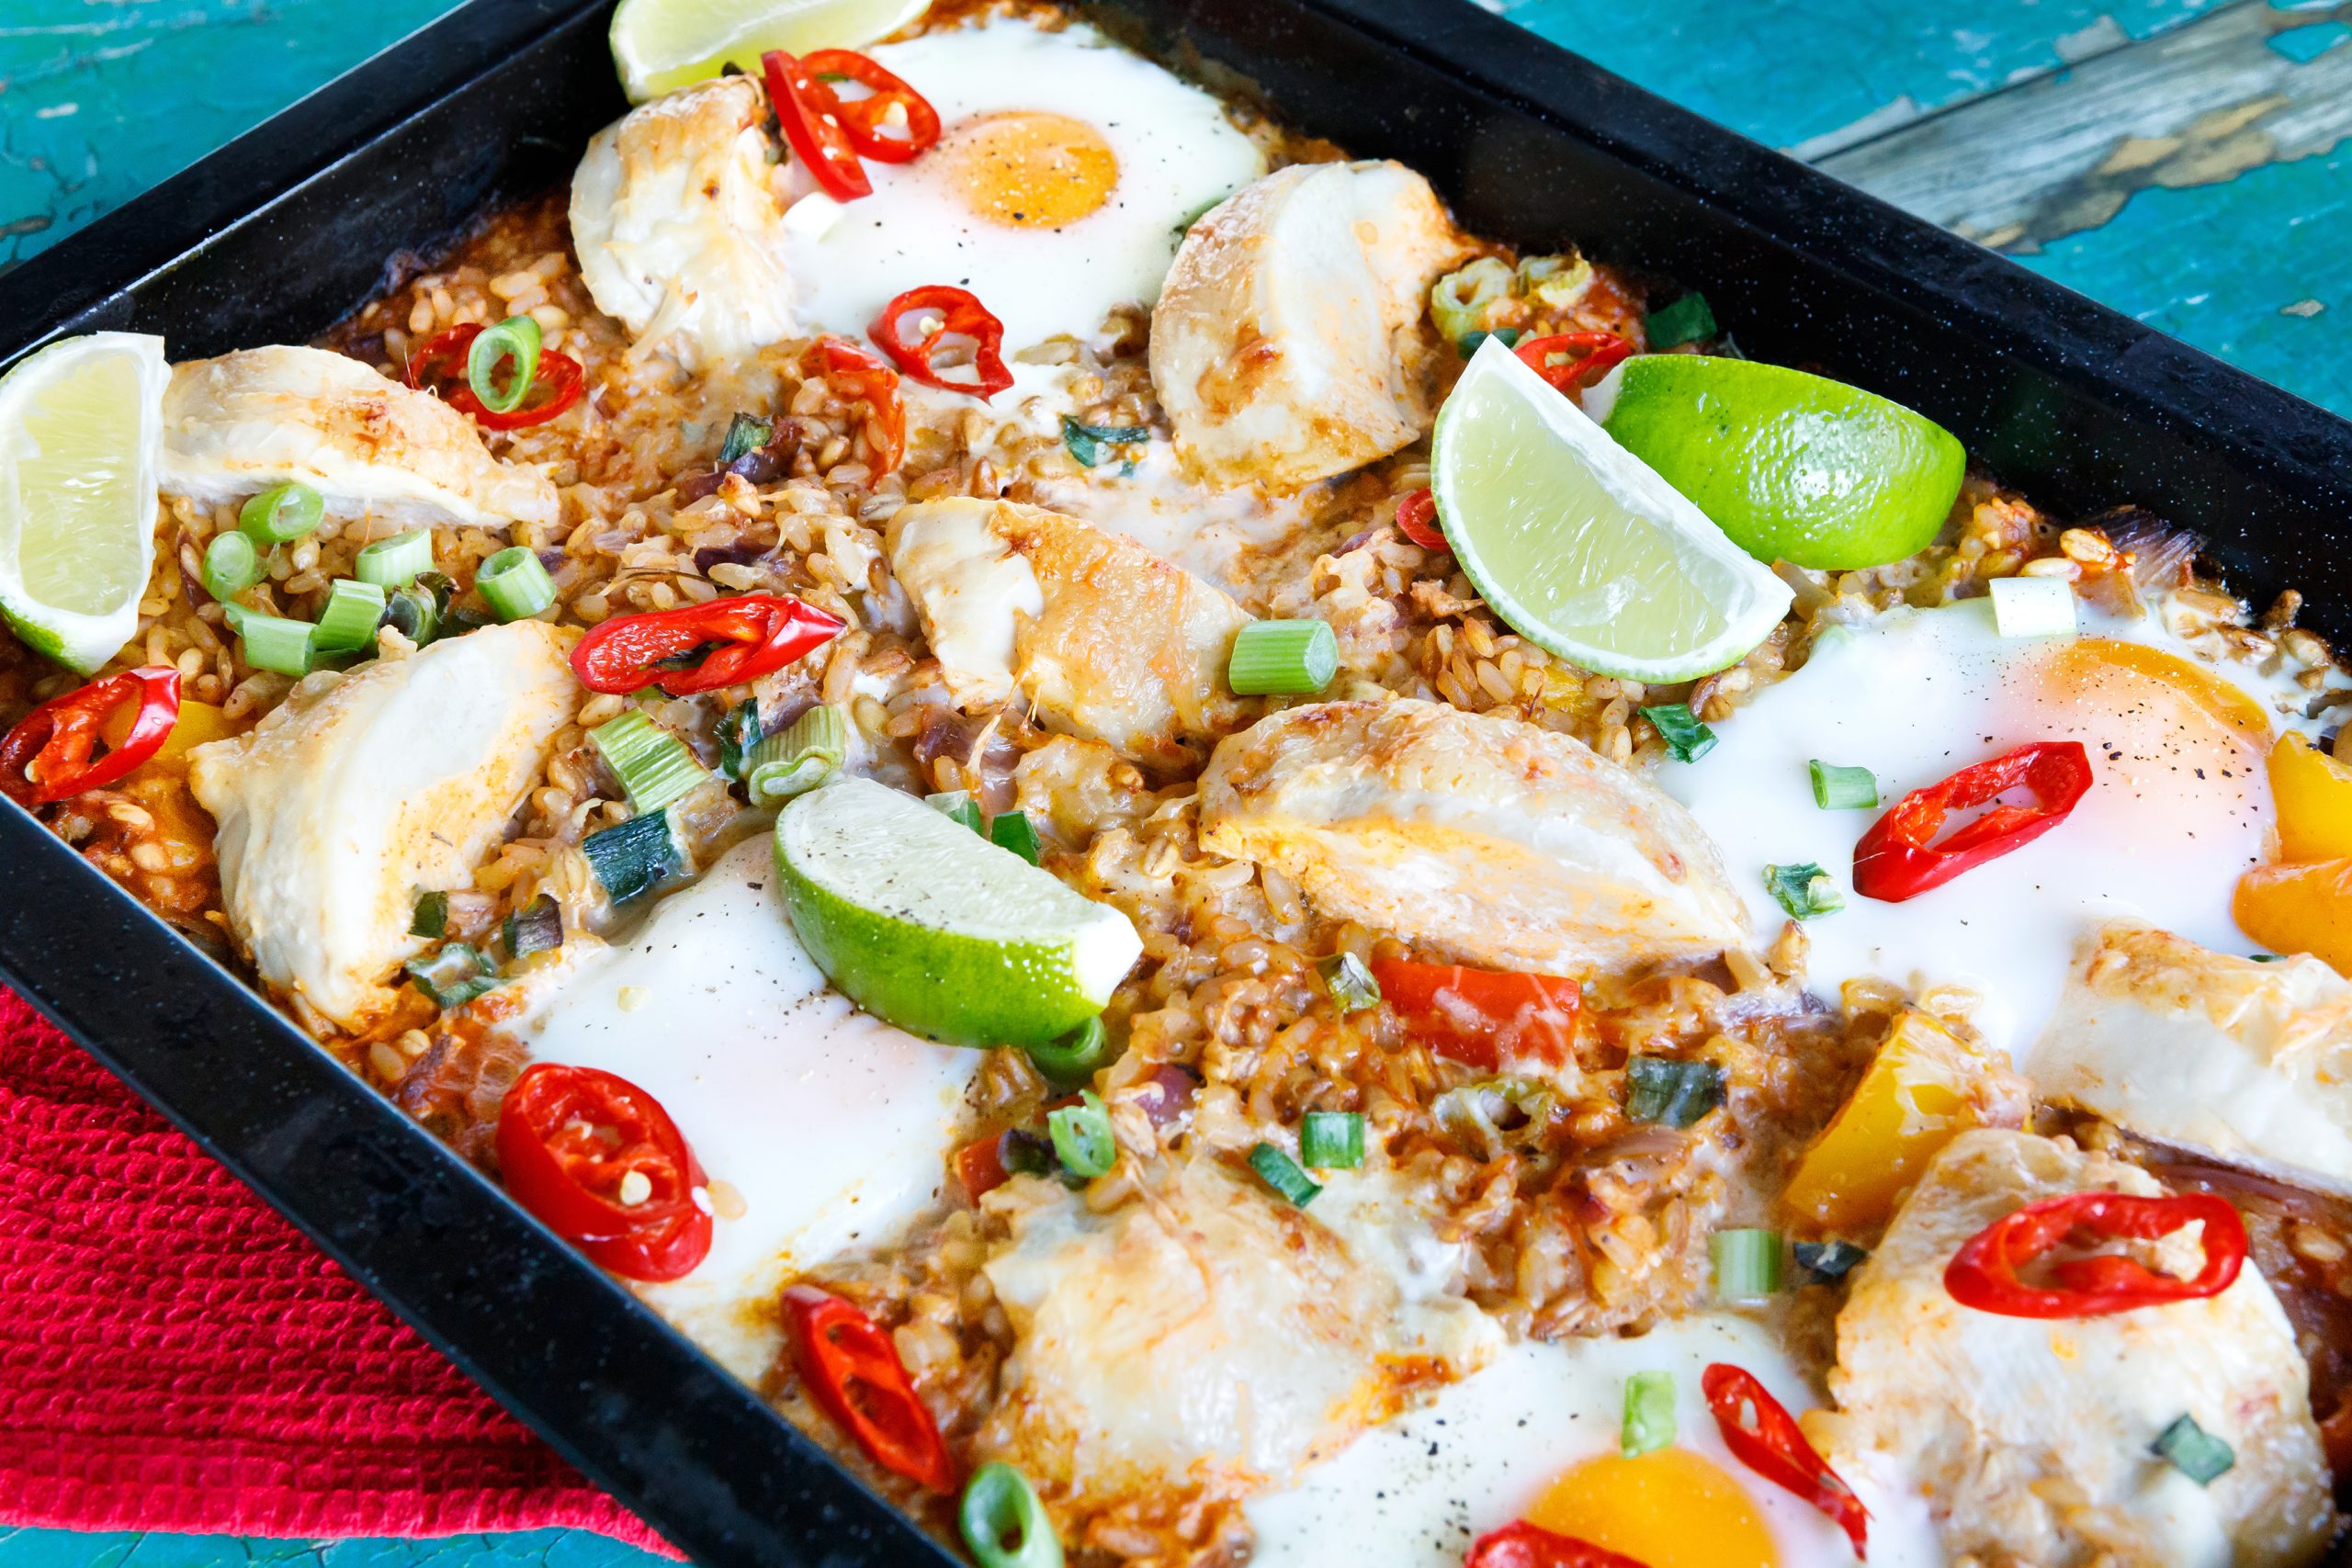 https://www.risogallo.co.uk/wp-content/uploads/2023/06/MEXICAN-STYLE-RICE-TRAYBAKE-WITH-3-GRAINS-RICE-AND-ROAST-CHICKEN-scaled.jpg